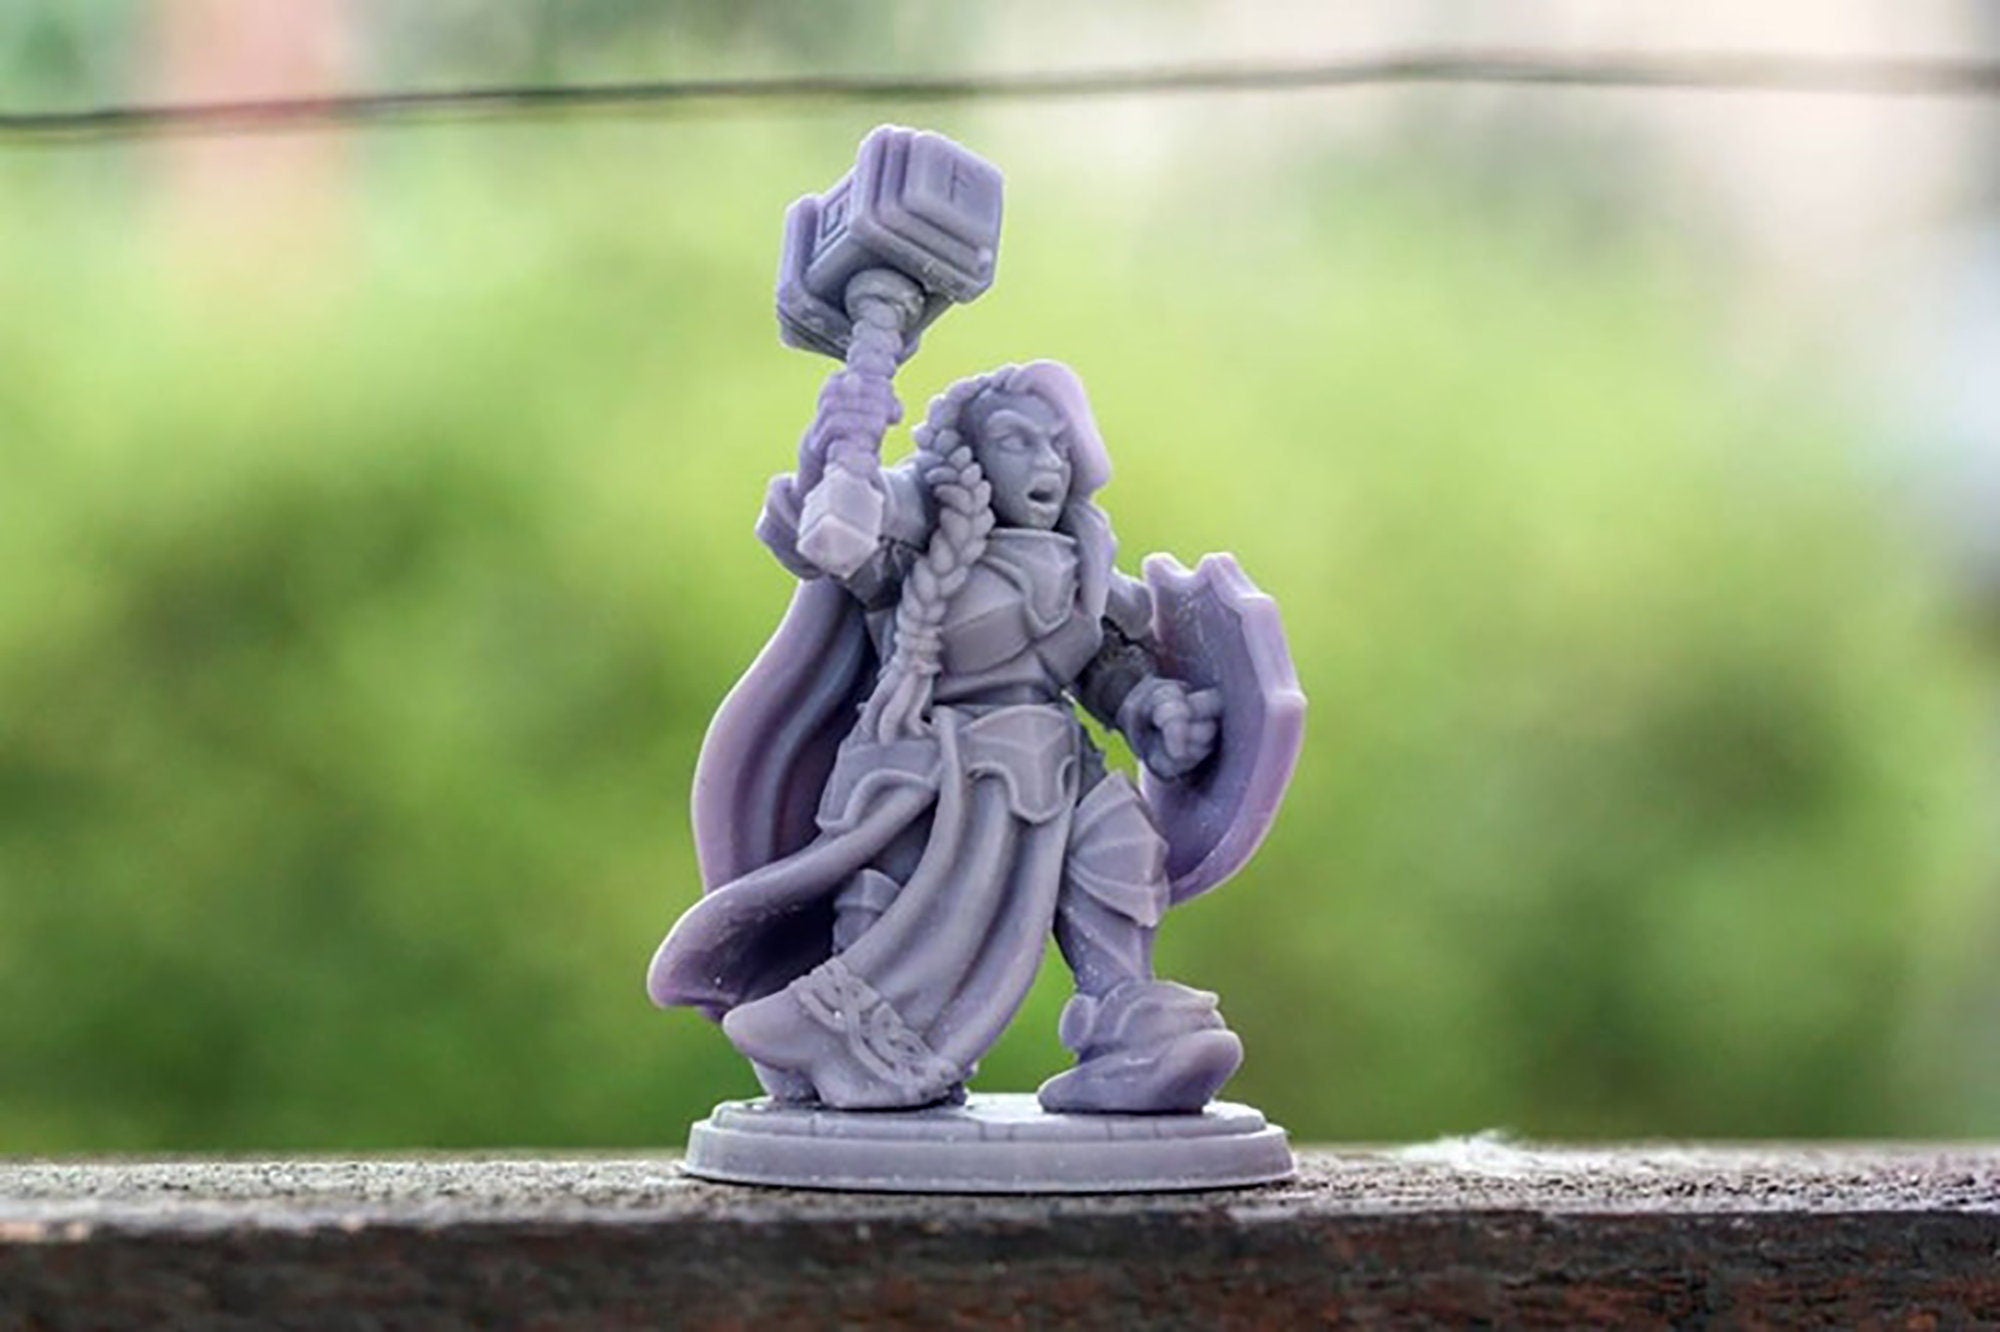 DWARF (F) PALADIN (2 Versios) "Bryna the indomitable" | Dungeons and Dragons | DnD | Pathfinder | Tabletop | RPG | Hero Size | 28 mm-Role Playing Miniatures